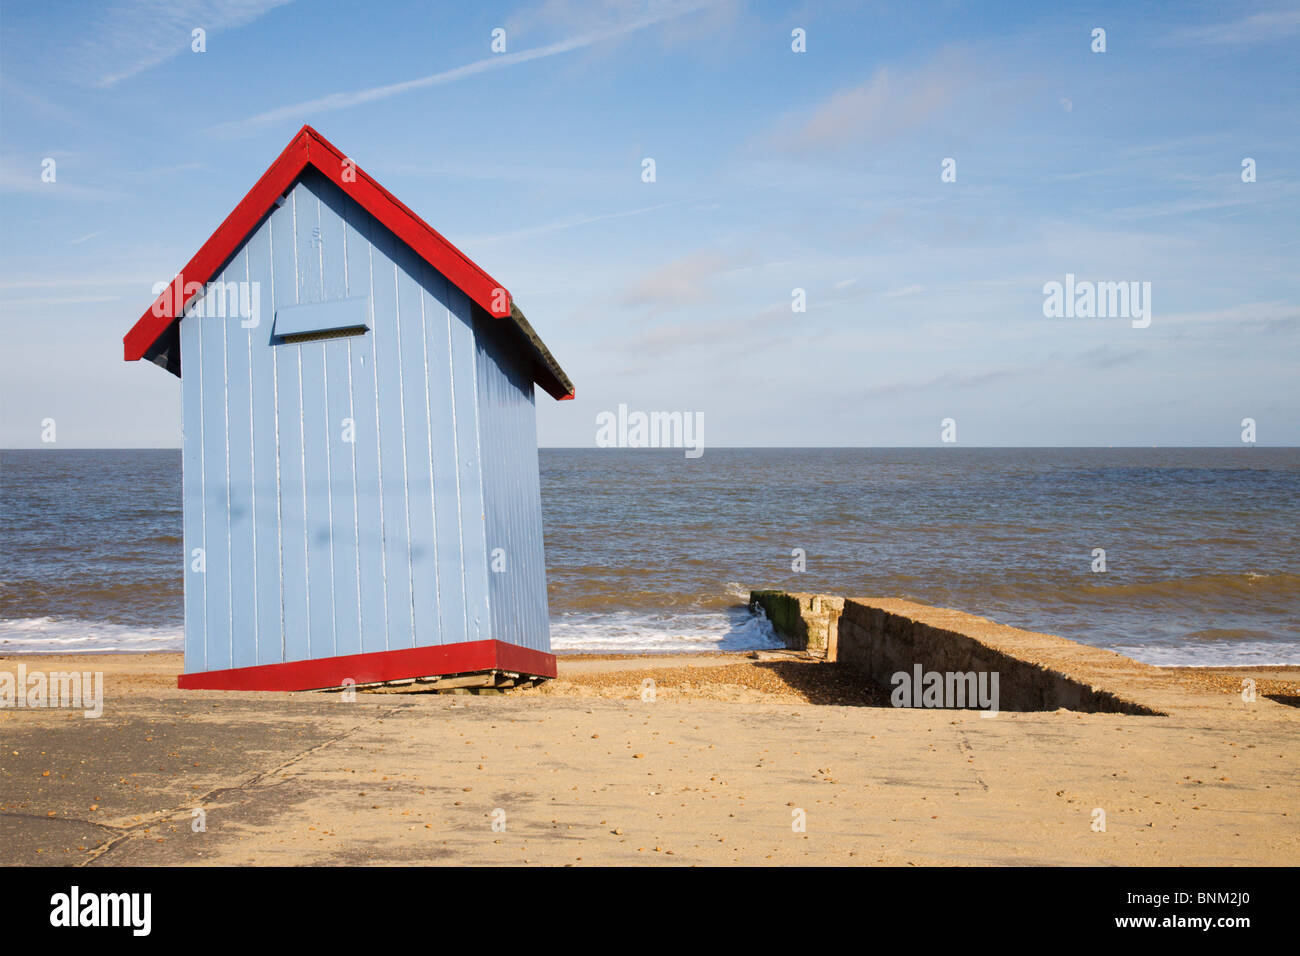 A wobbly, unstable, but nicely painted beach hut at Felixstowe. Stock Photo